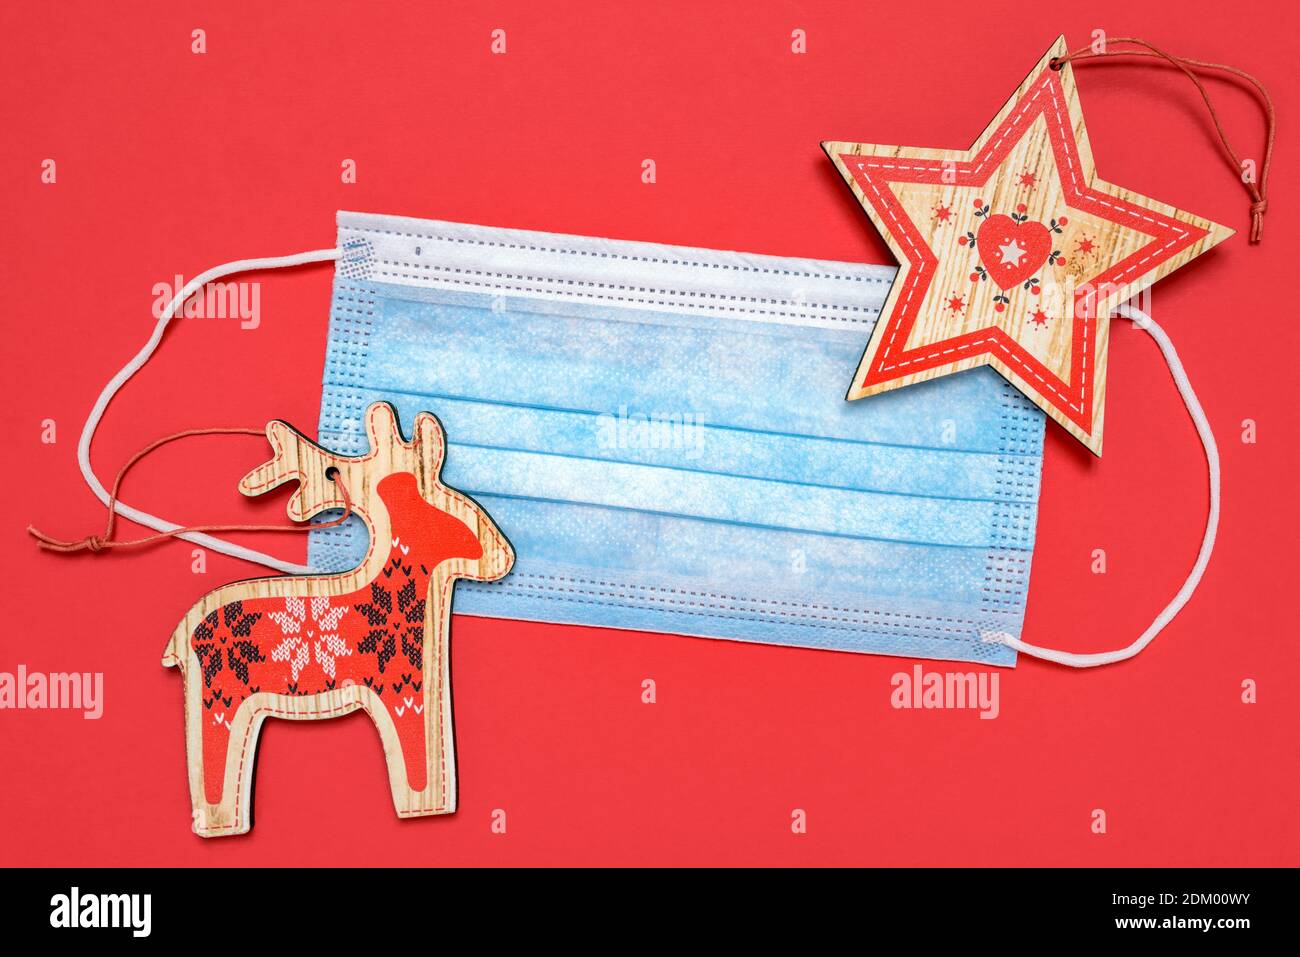 Medical mask and decorative Christmas ornaments on red background. The concept of celebrating the New Year and Christmas during the COVID-19 epidemic. Stock Photo